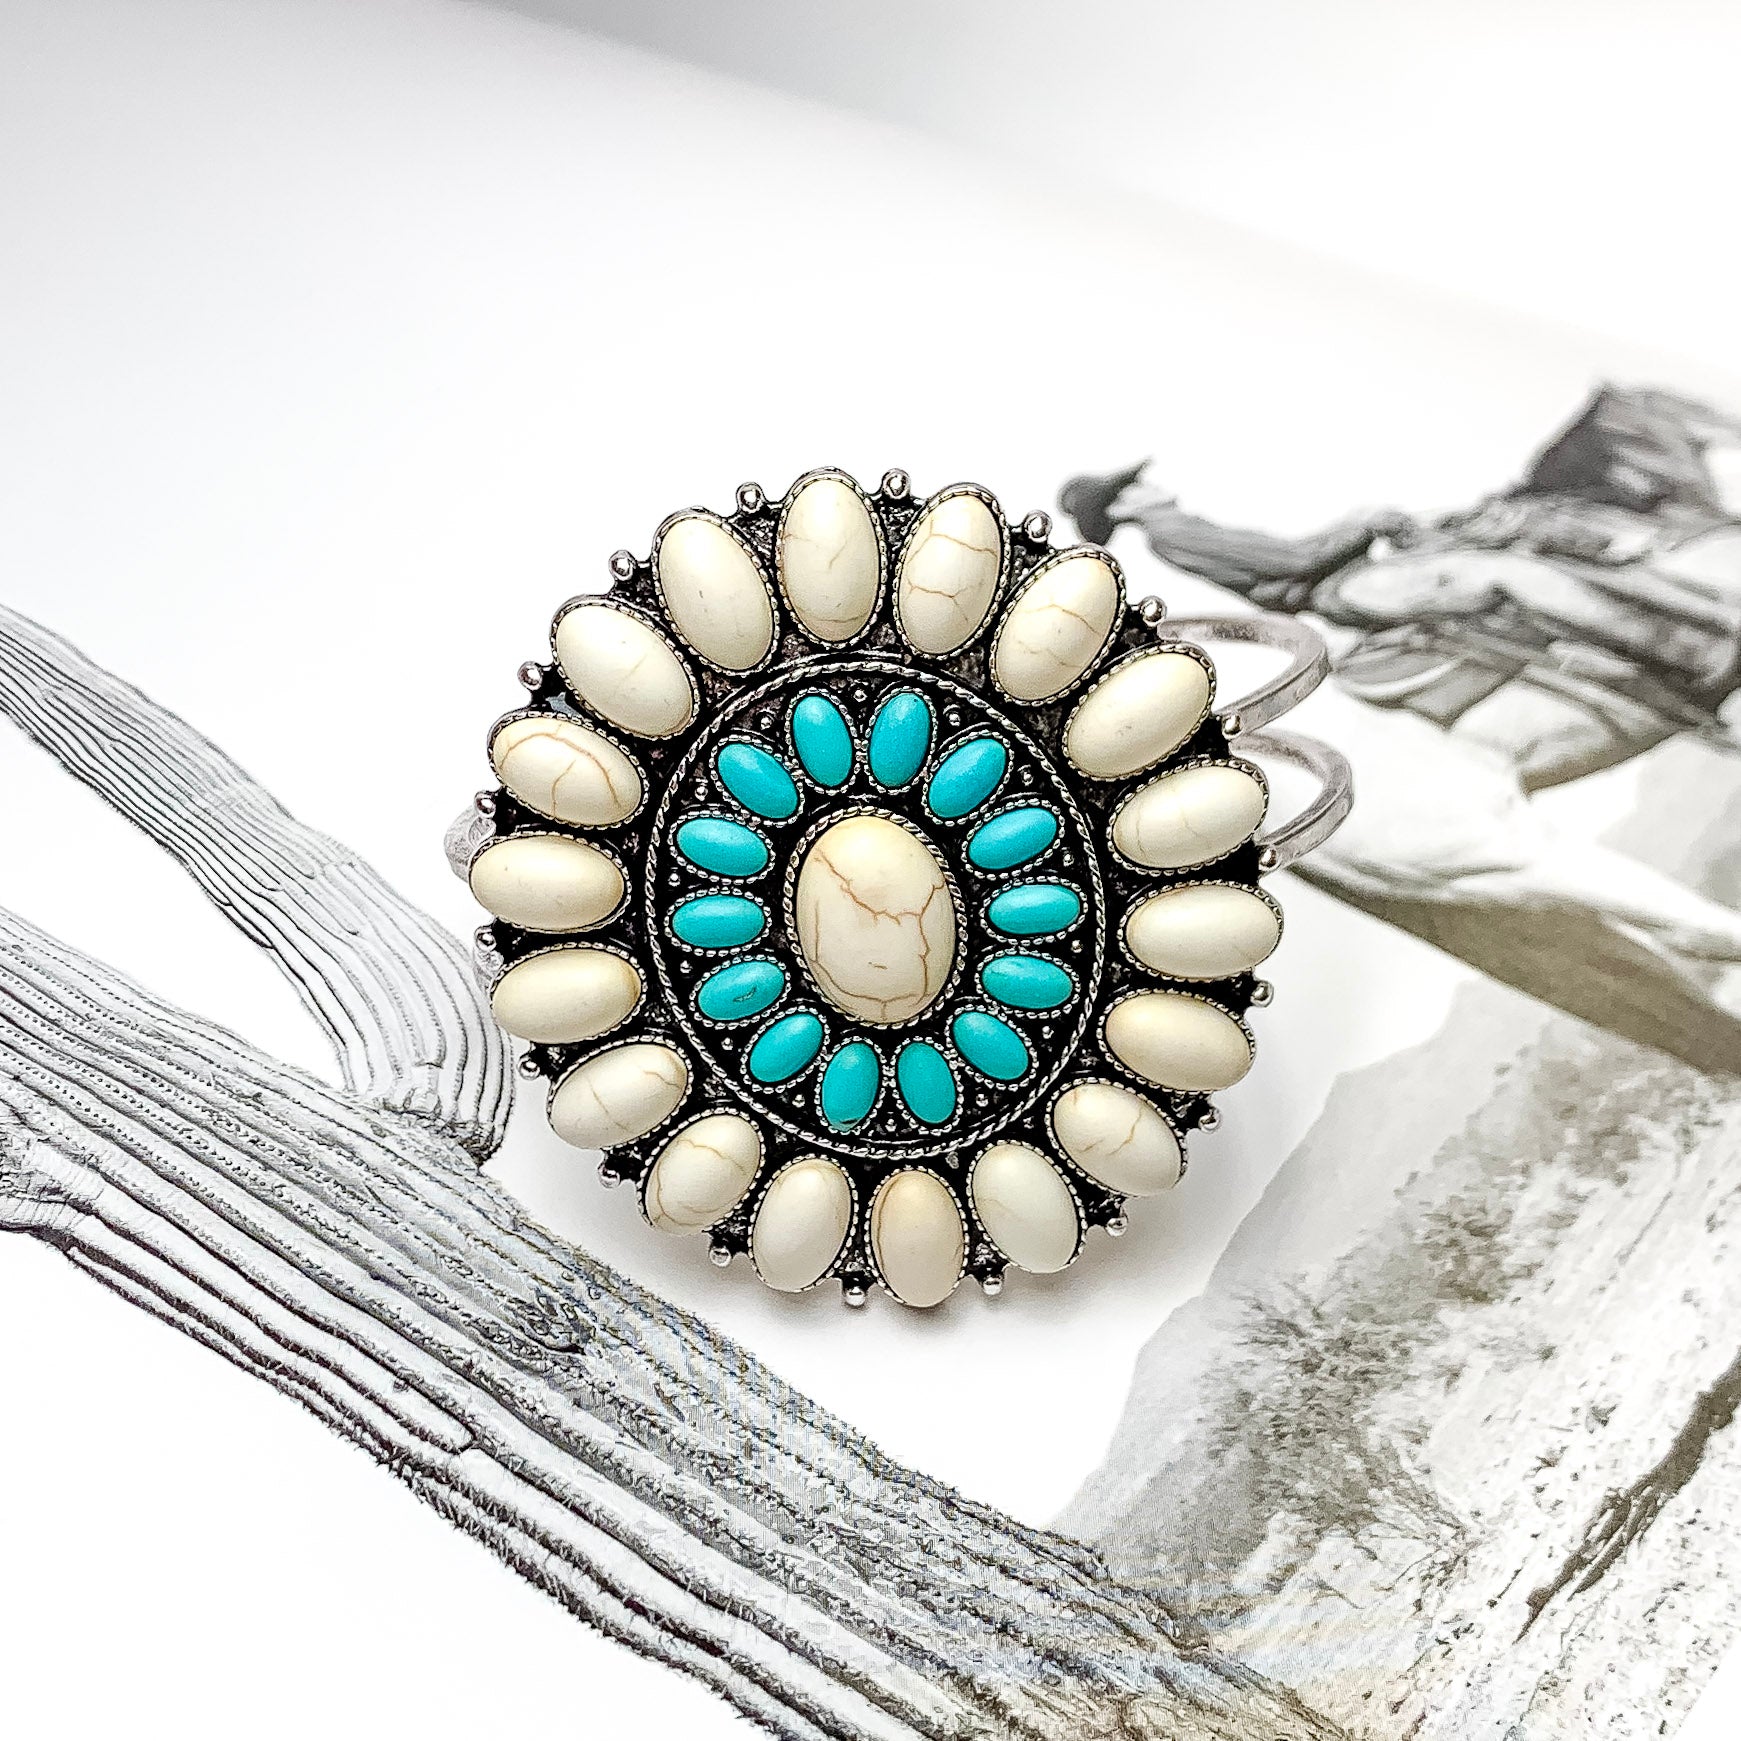 Ivory and Turquoise Oval Stone Concho Hinge Cuff Bracelet. Pictured laying on top of an open book with a western picture behind the bracelet. 